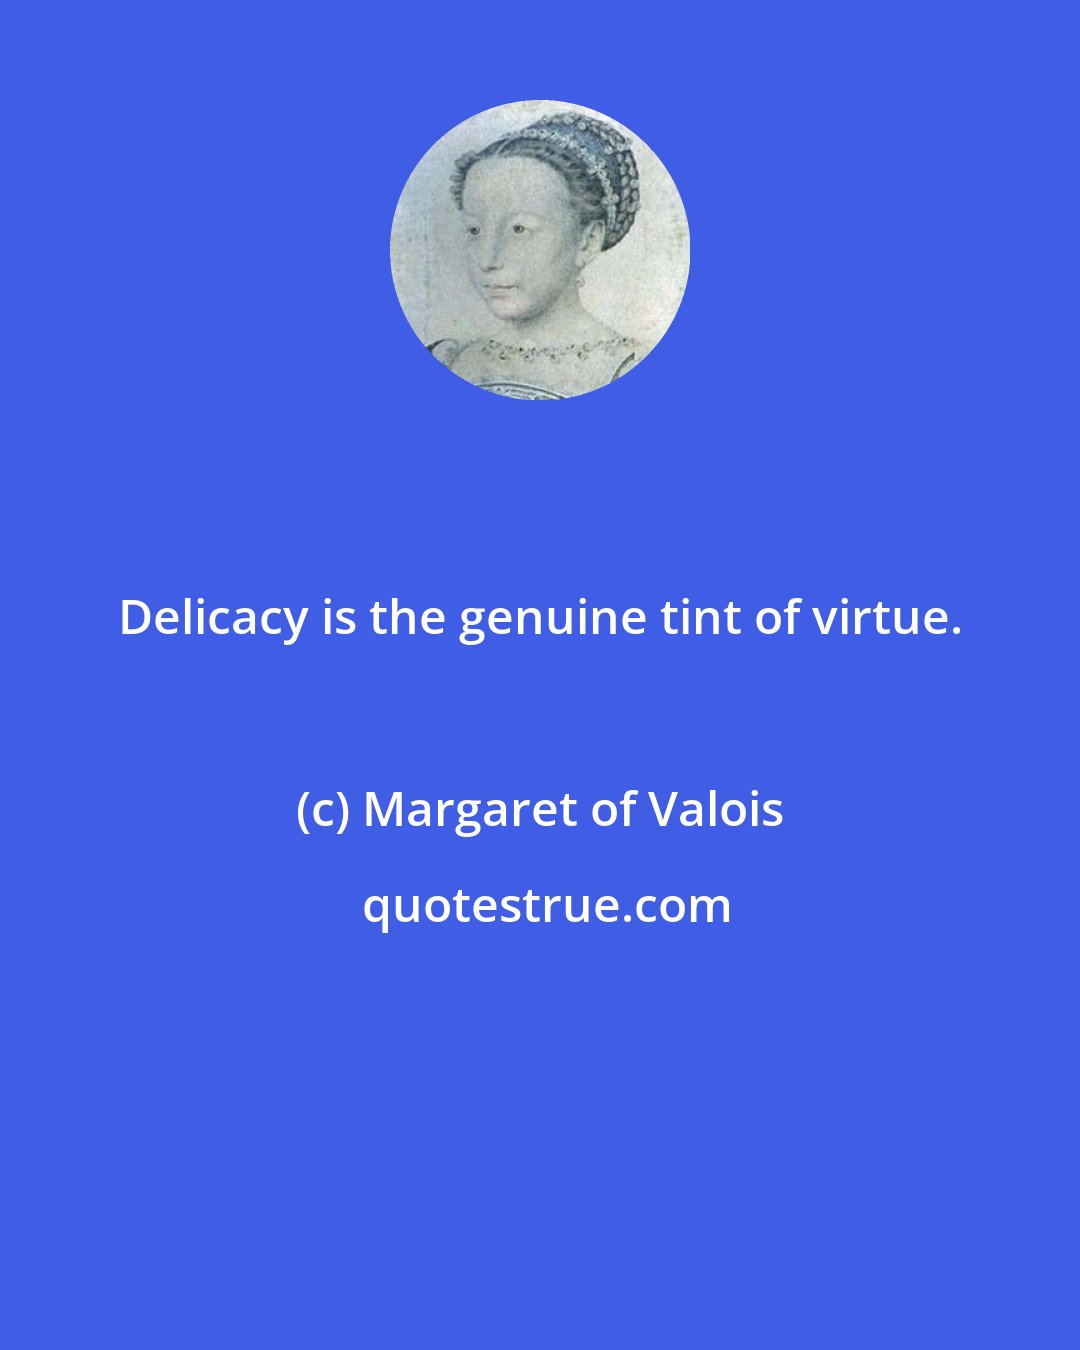 Margaret of Valois: Delicacy is the genuine tint of virtue.